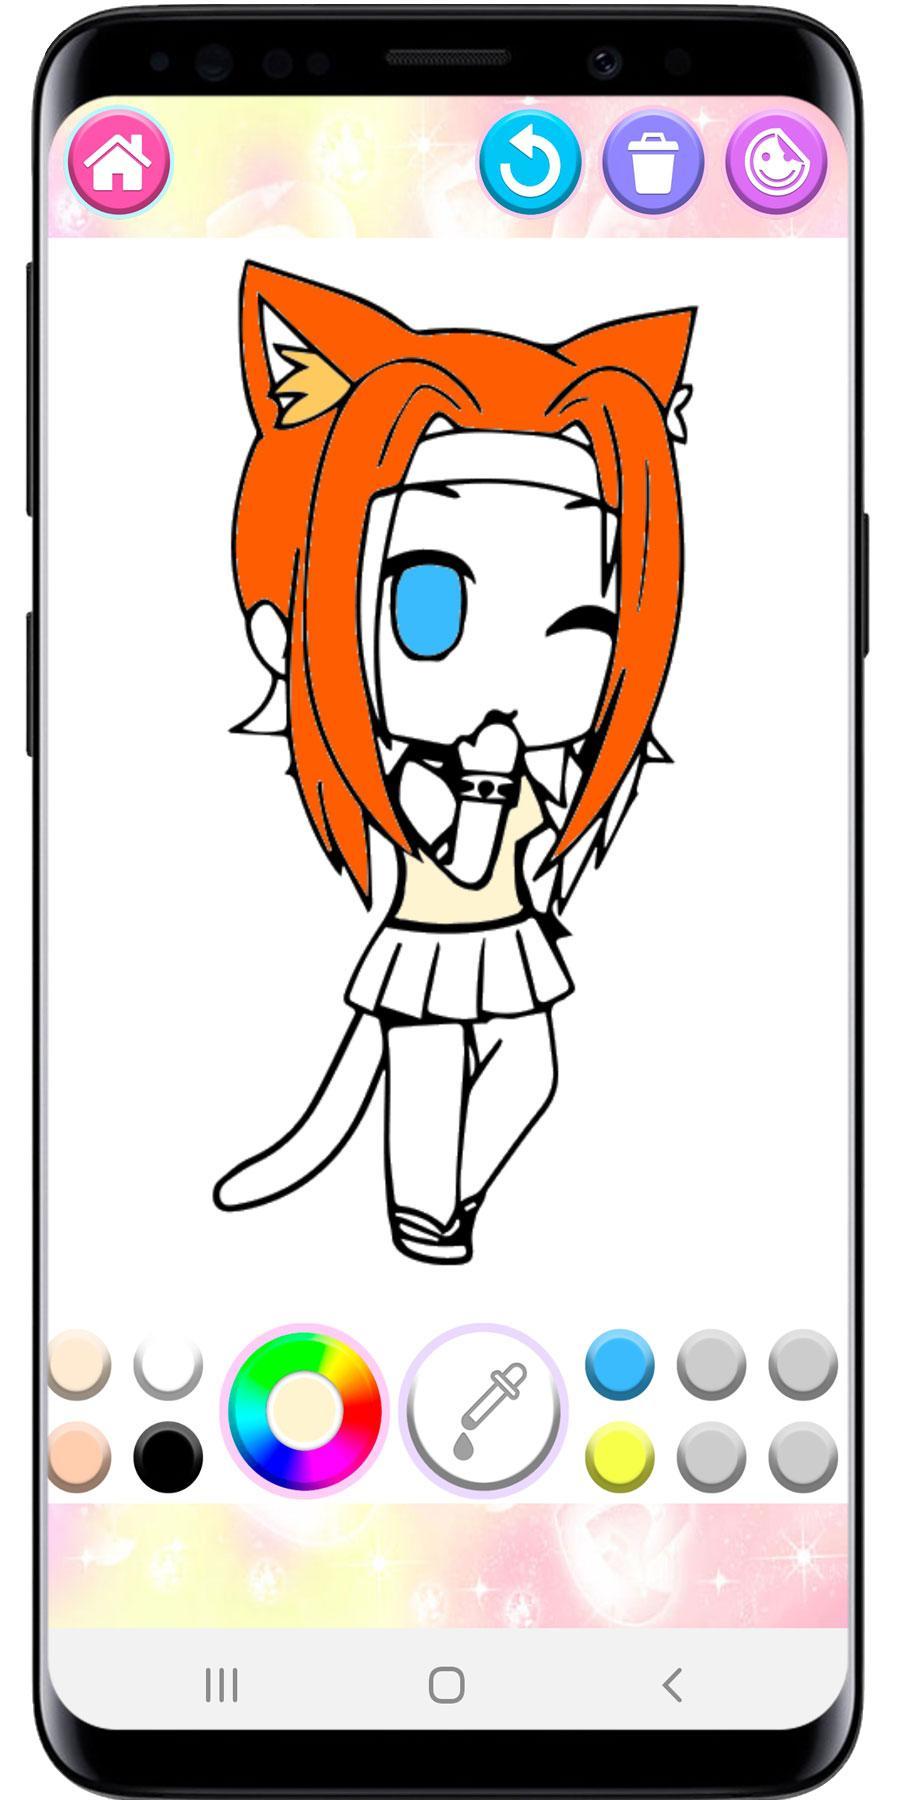 Download How to Color Gacha Life - Coloring Book for Android - APK ...